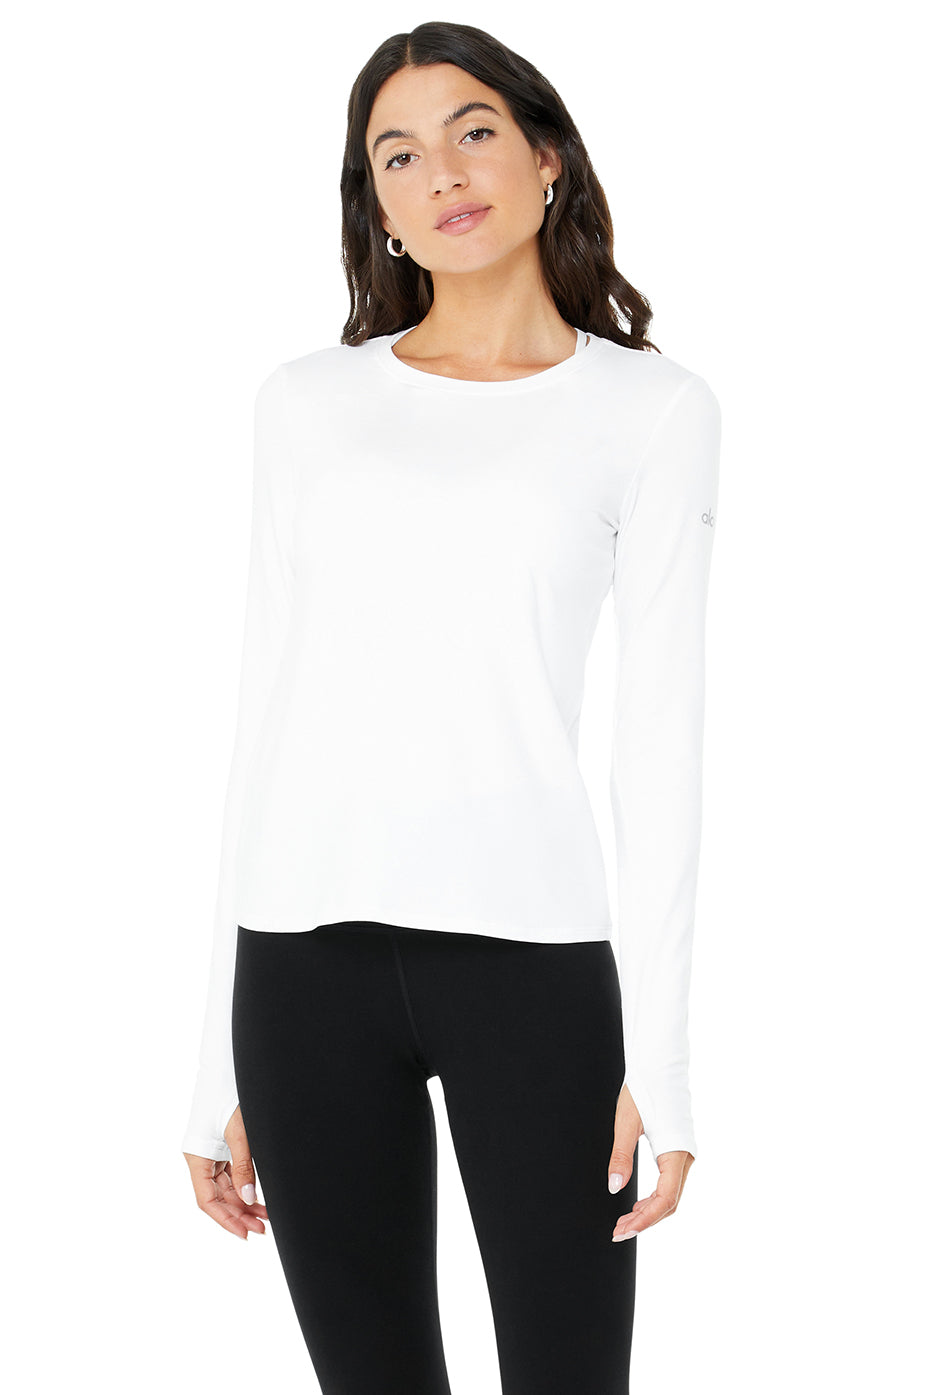 Alosoft Finesse Long Sleeve Top in White by Alo Yoga